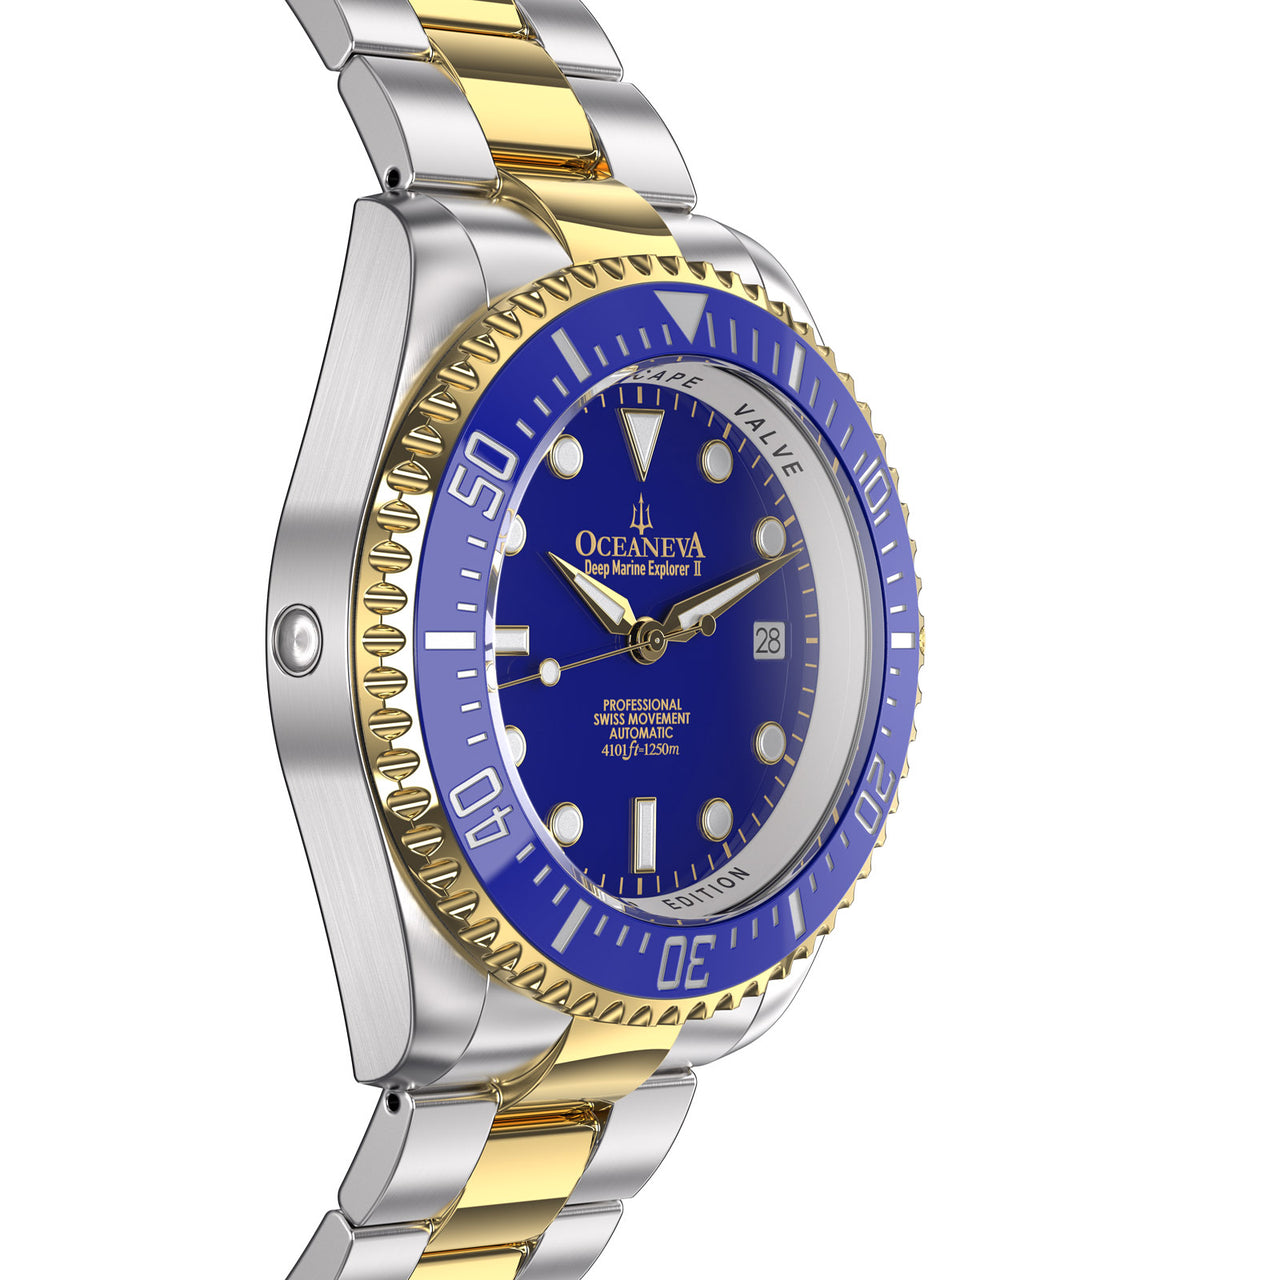 Oceaneva 1250M Dive Watch Blue and Gold Side Helium Escape Valve View